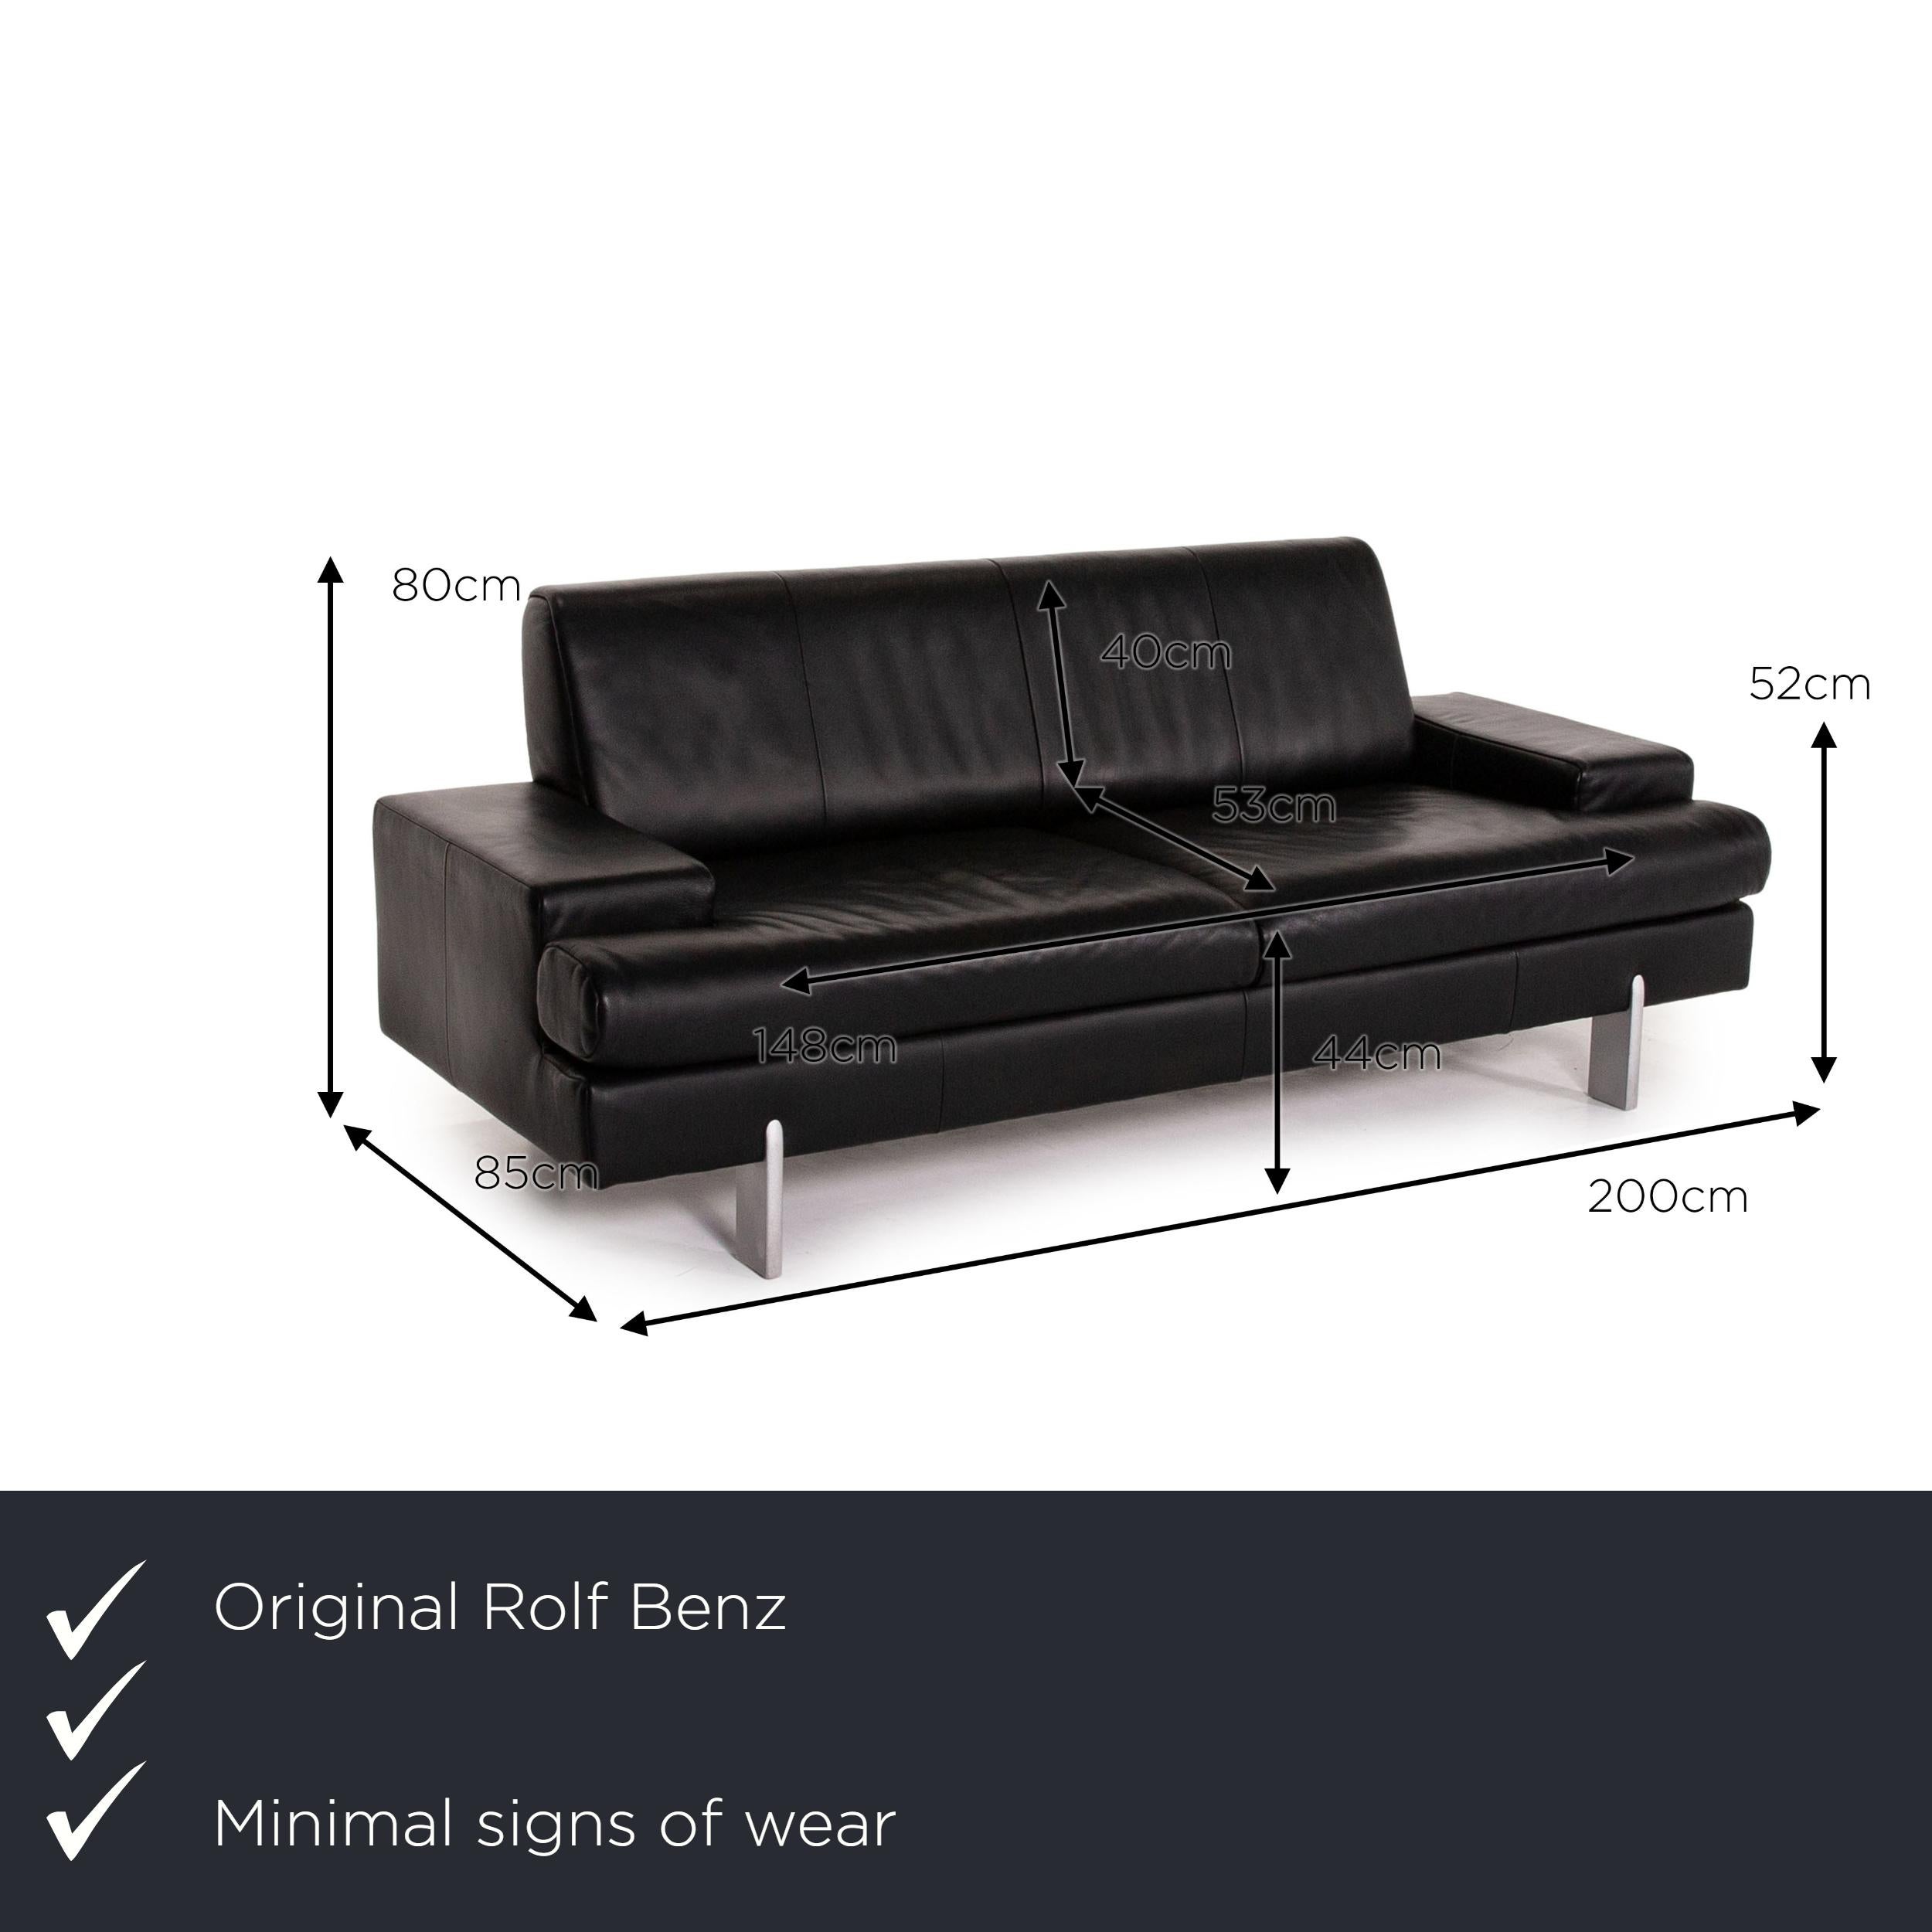 We present to you a Rolf Benz AK 644 leather sofa black three-seater couch.

Product measurements in centimeters:

Depth 85
Width 200
Height 80
Seat height 44
Rest height 52
Seat depth 53
Seat width 148
Back height 40.
 
  
 
  